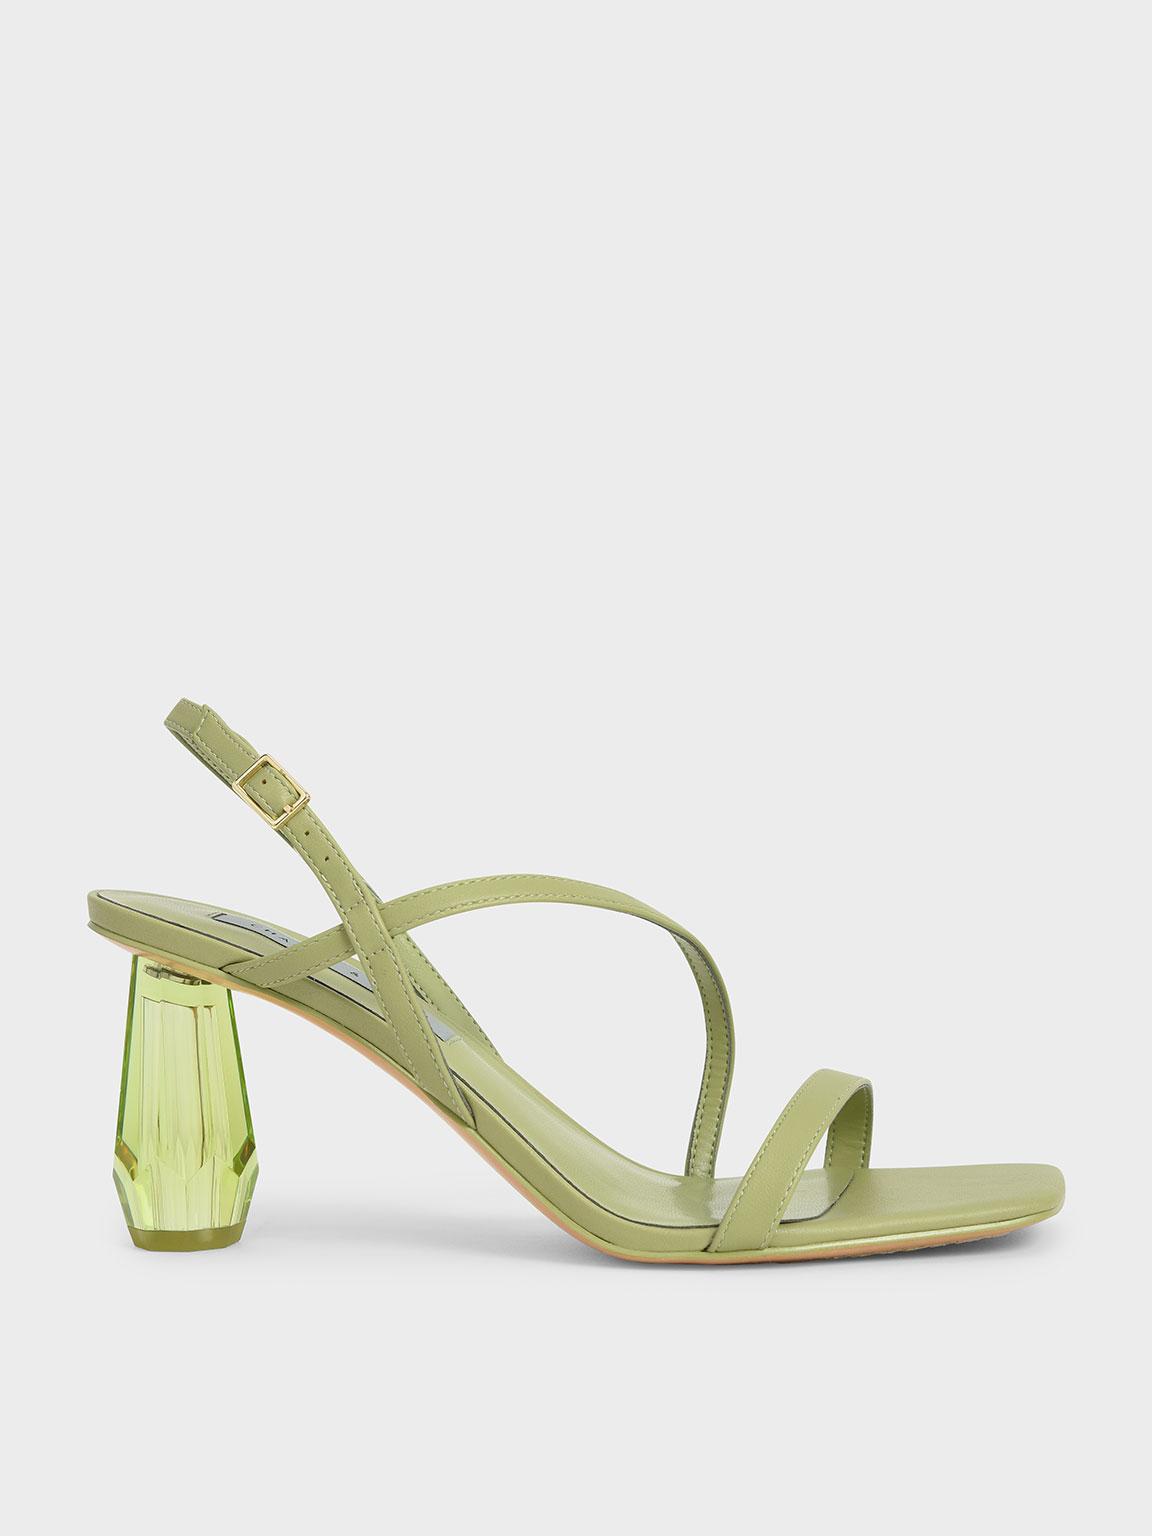 Charles & Keith Women's Cylindrical Heel Sandals